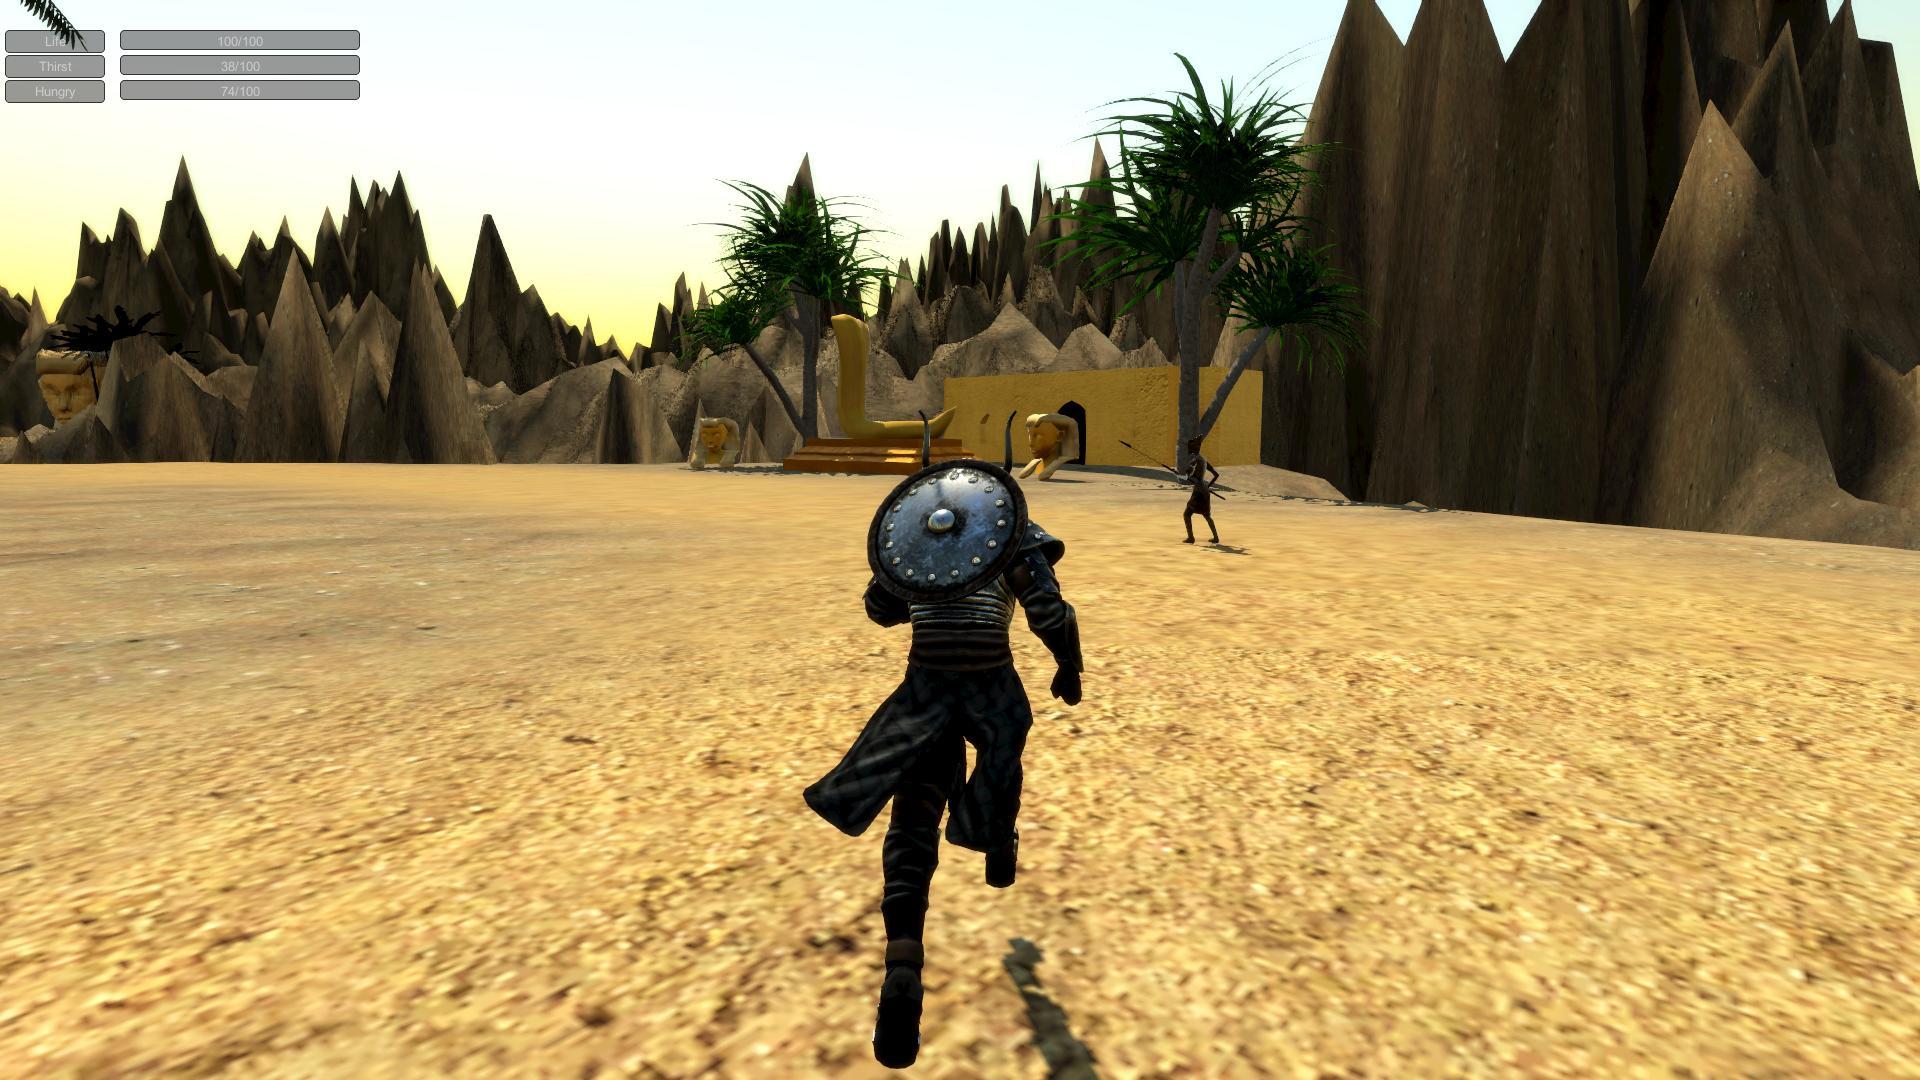 Screenshot №15 from game The Last Hope